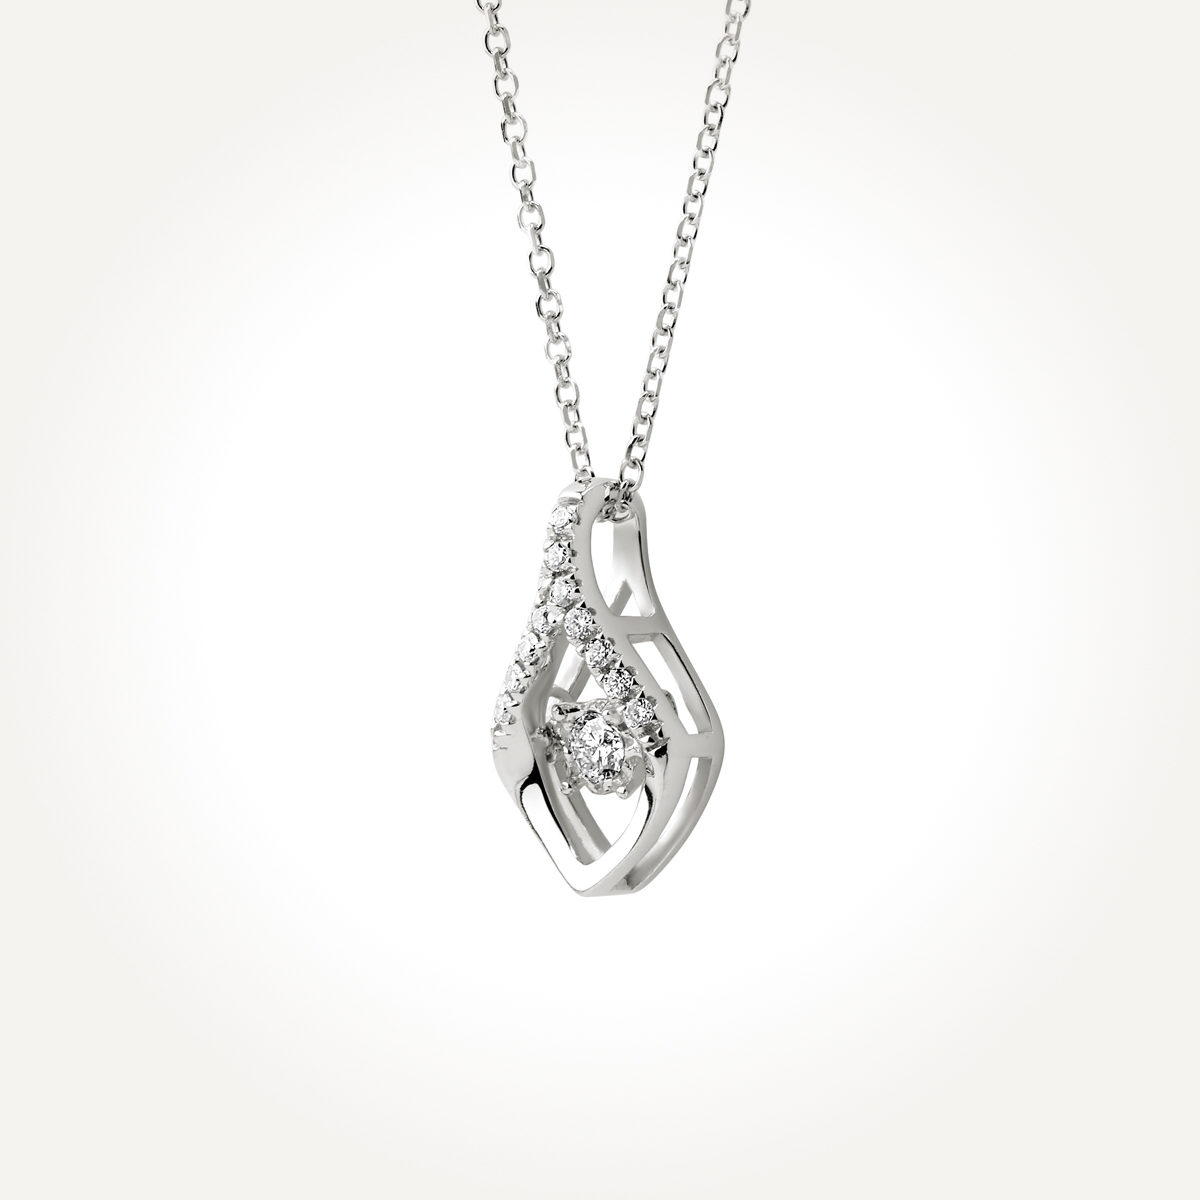 14KT White Gold Drop Necklace